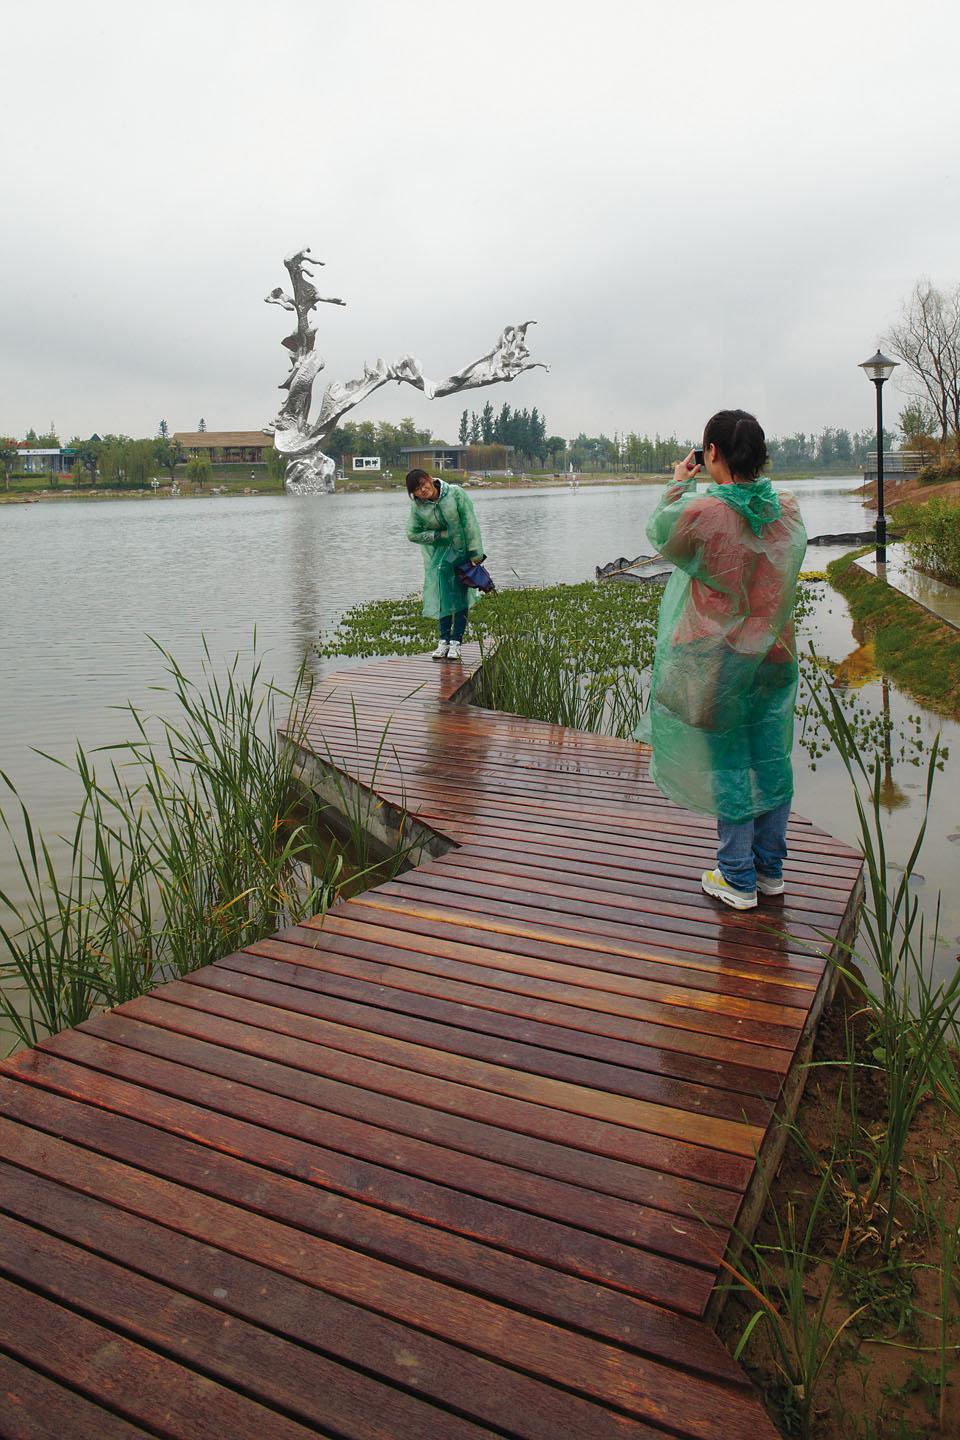 Chan-ba Ecological District,
once occupied by a sand
quarry and a badly polluted
water system, has now been
restored.